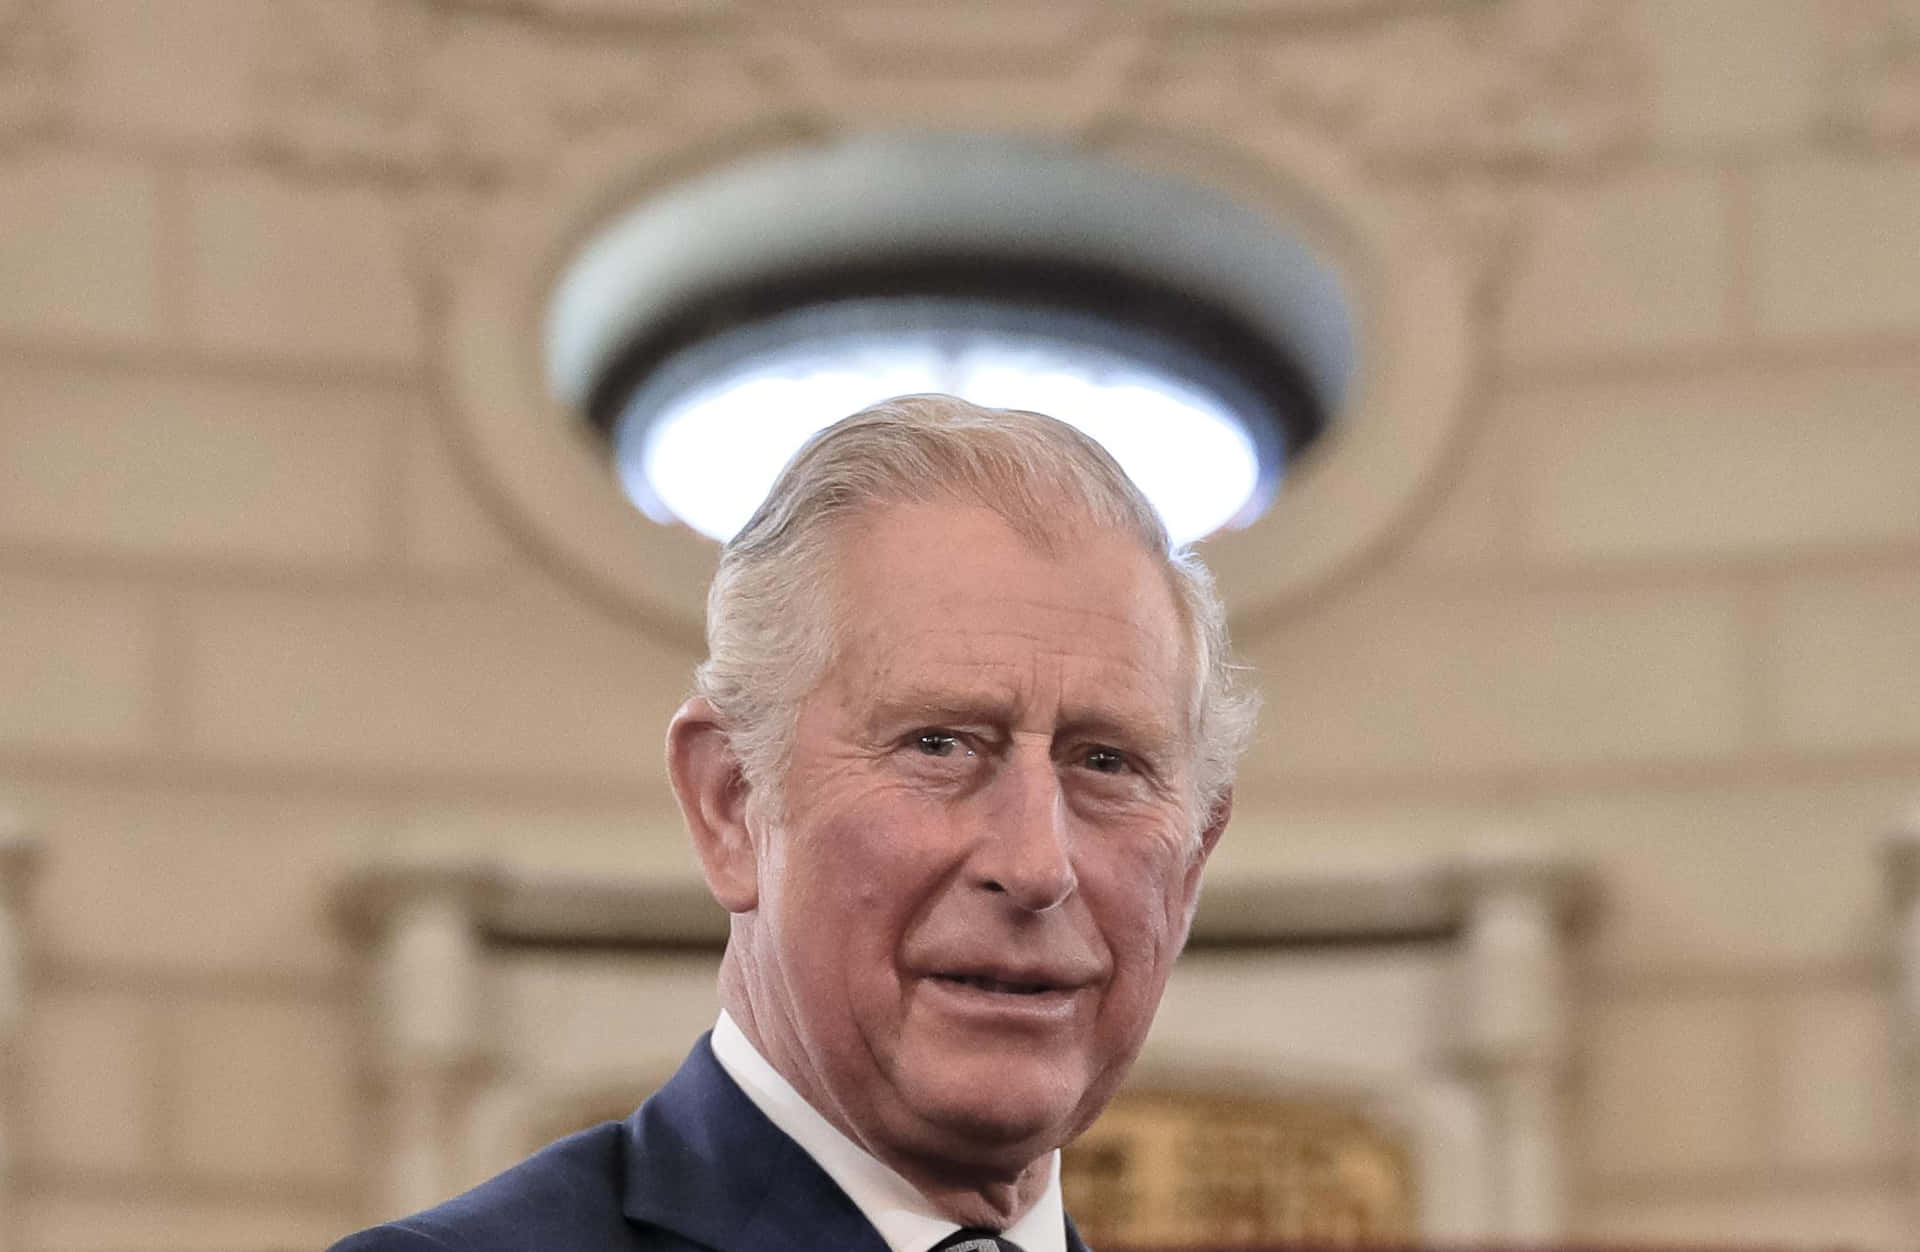 King Charles III Speaking At Event Wallpaper